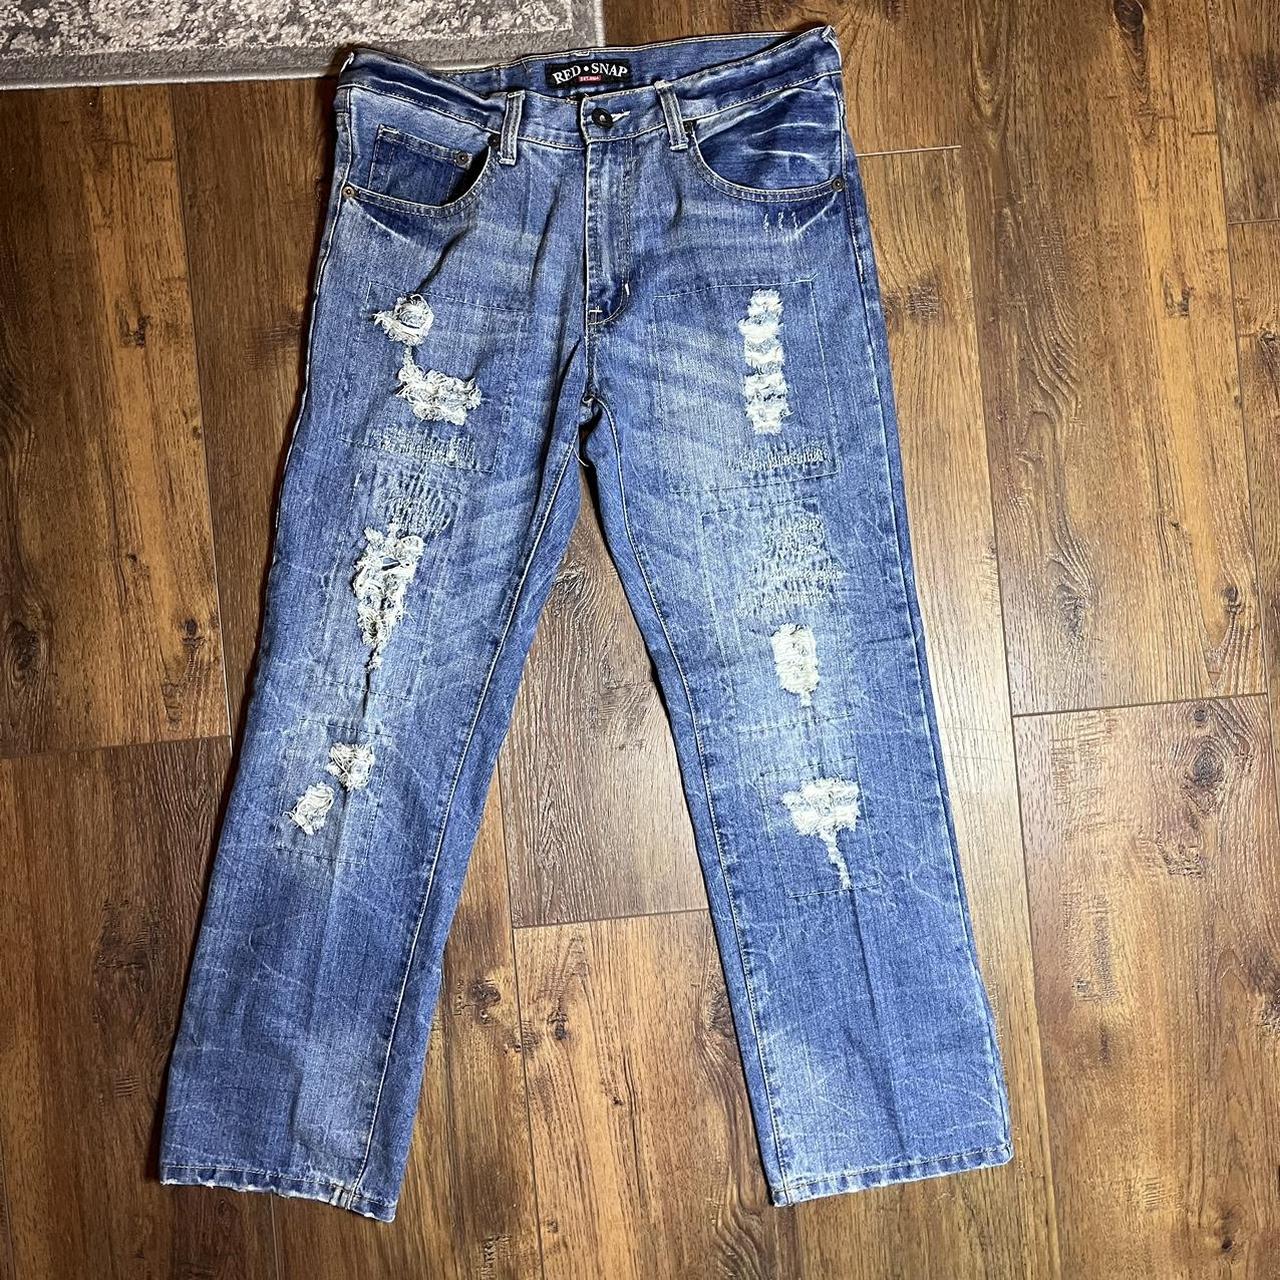 Bundle of 2 RSQ Distressed Mom Jeans Size 31 ⭐️SALE⭐️ - Depop